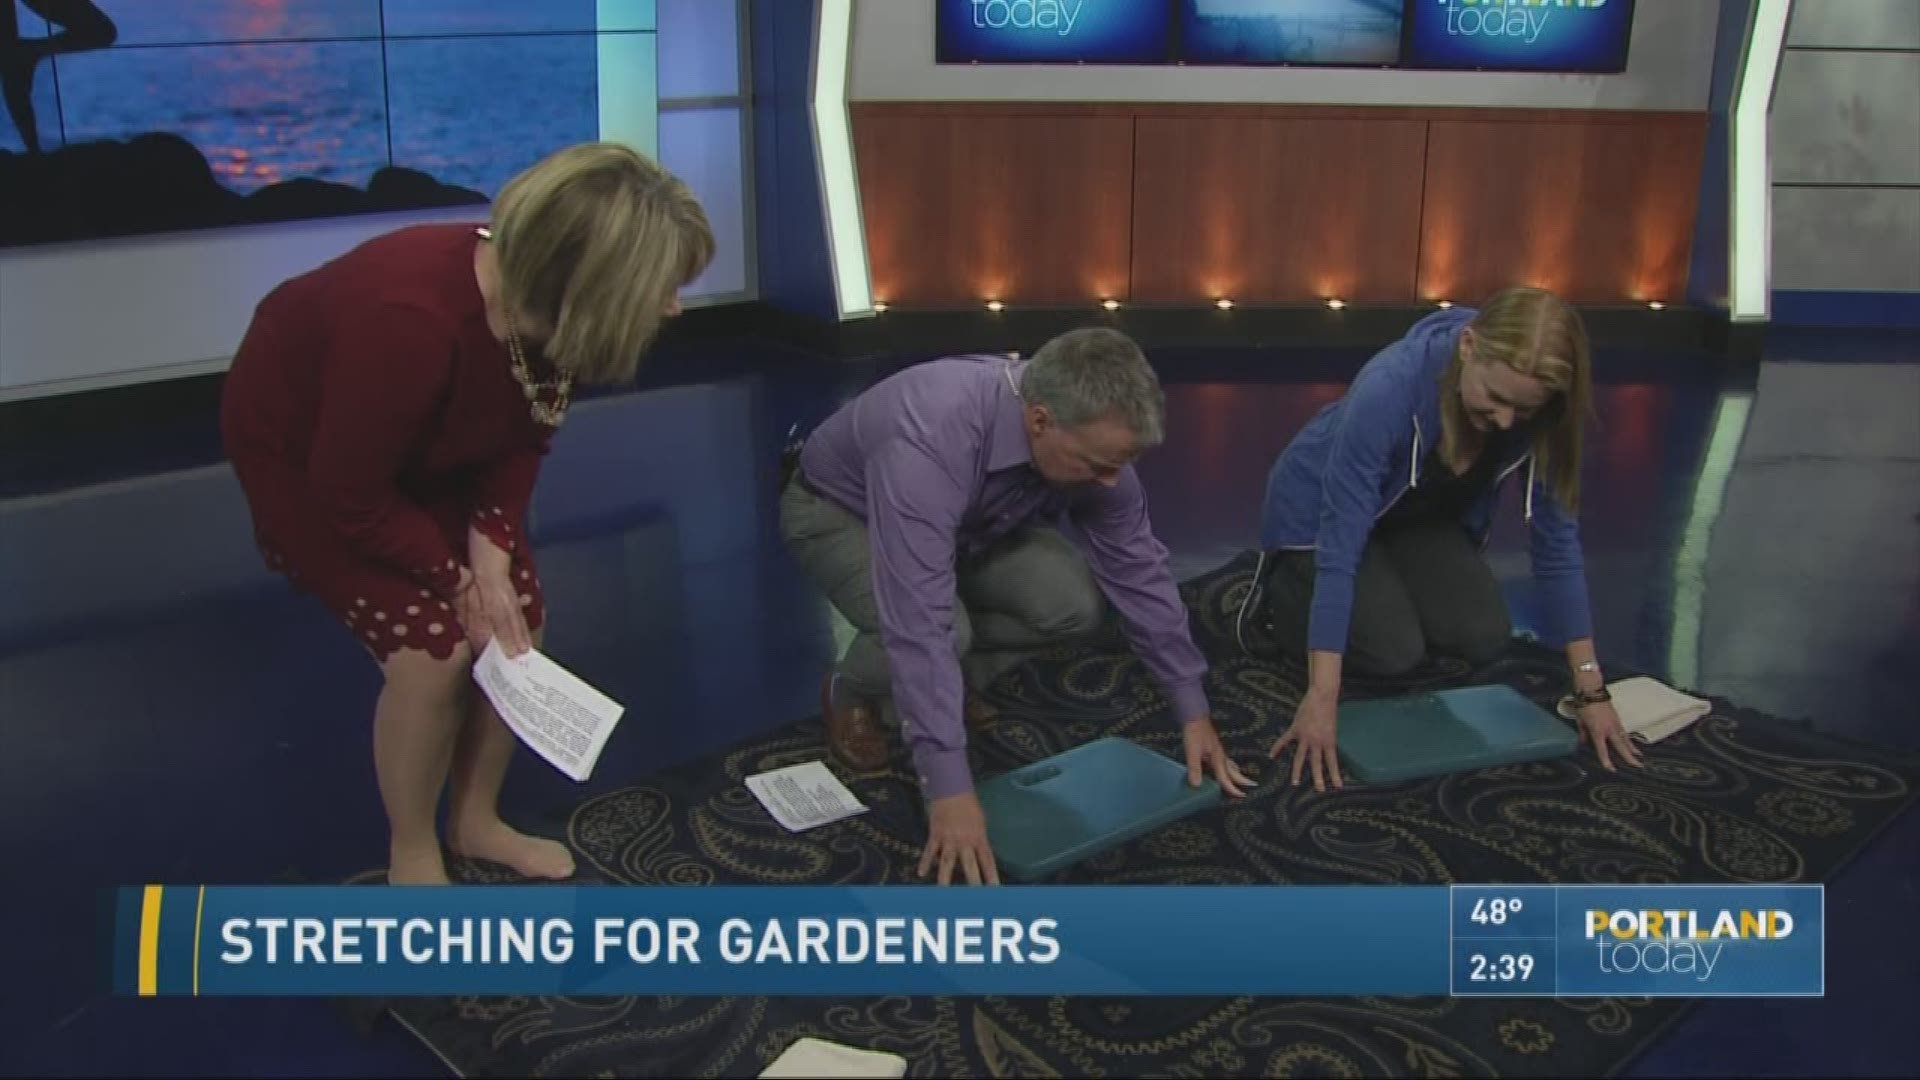 Stretching for gardeners